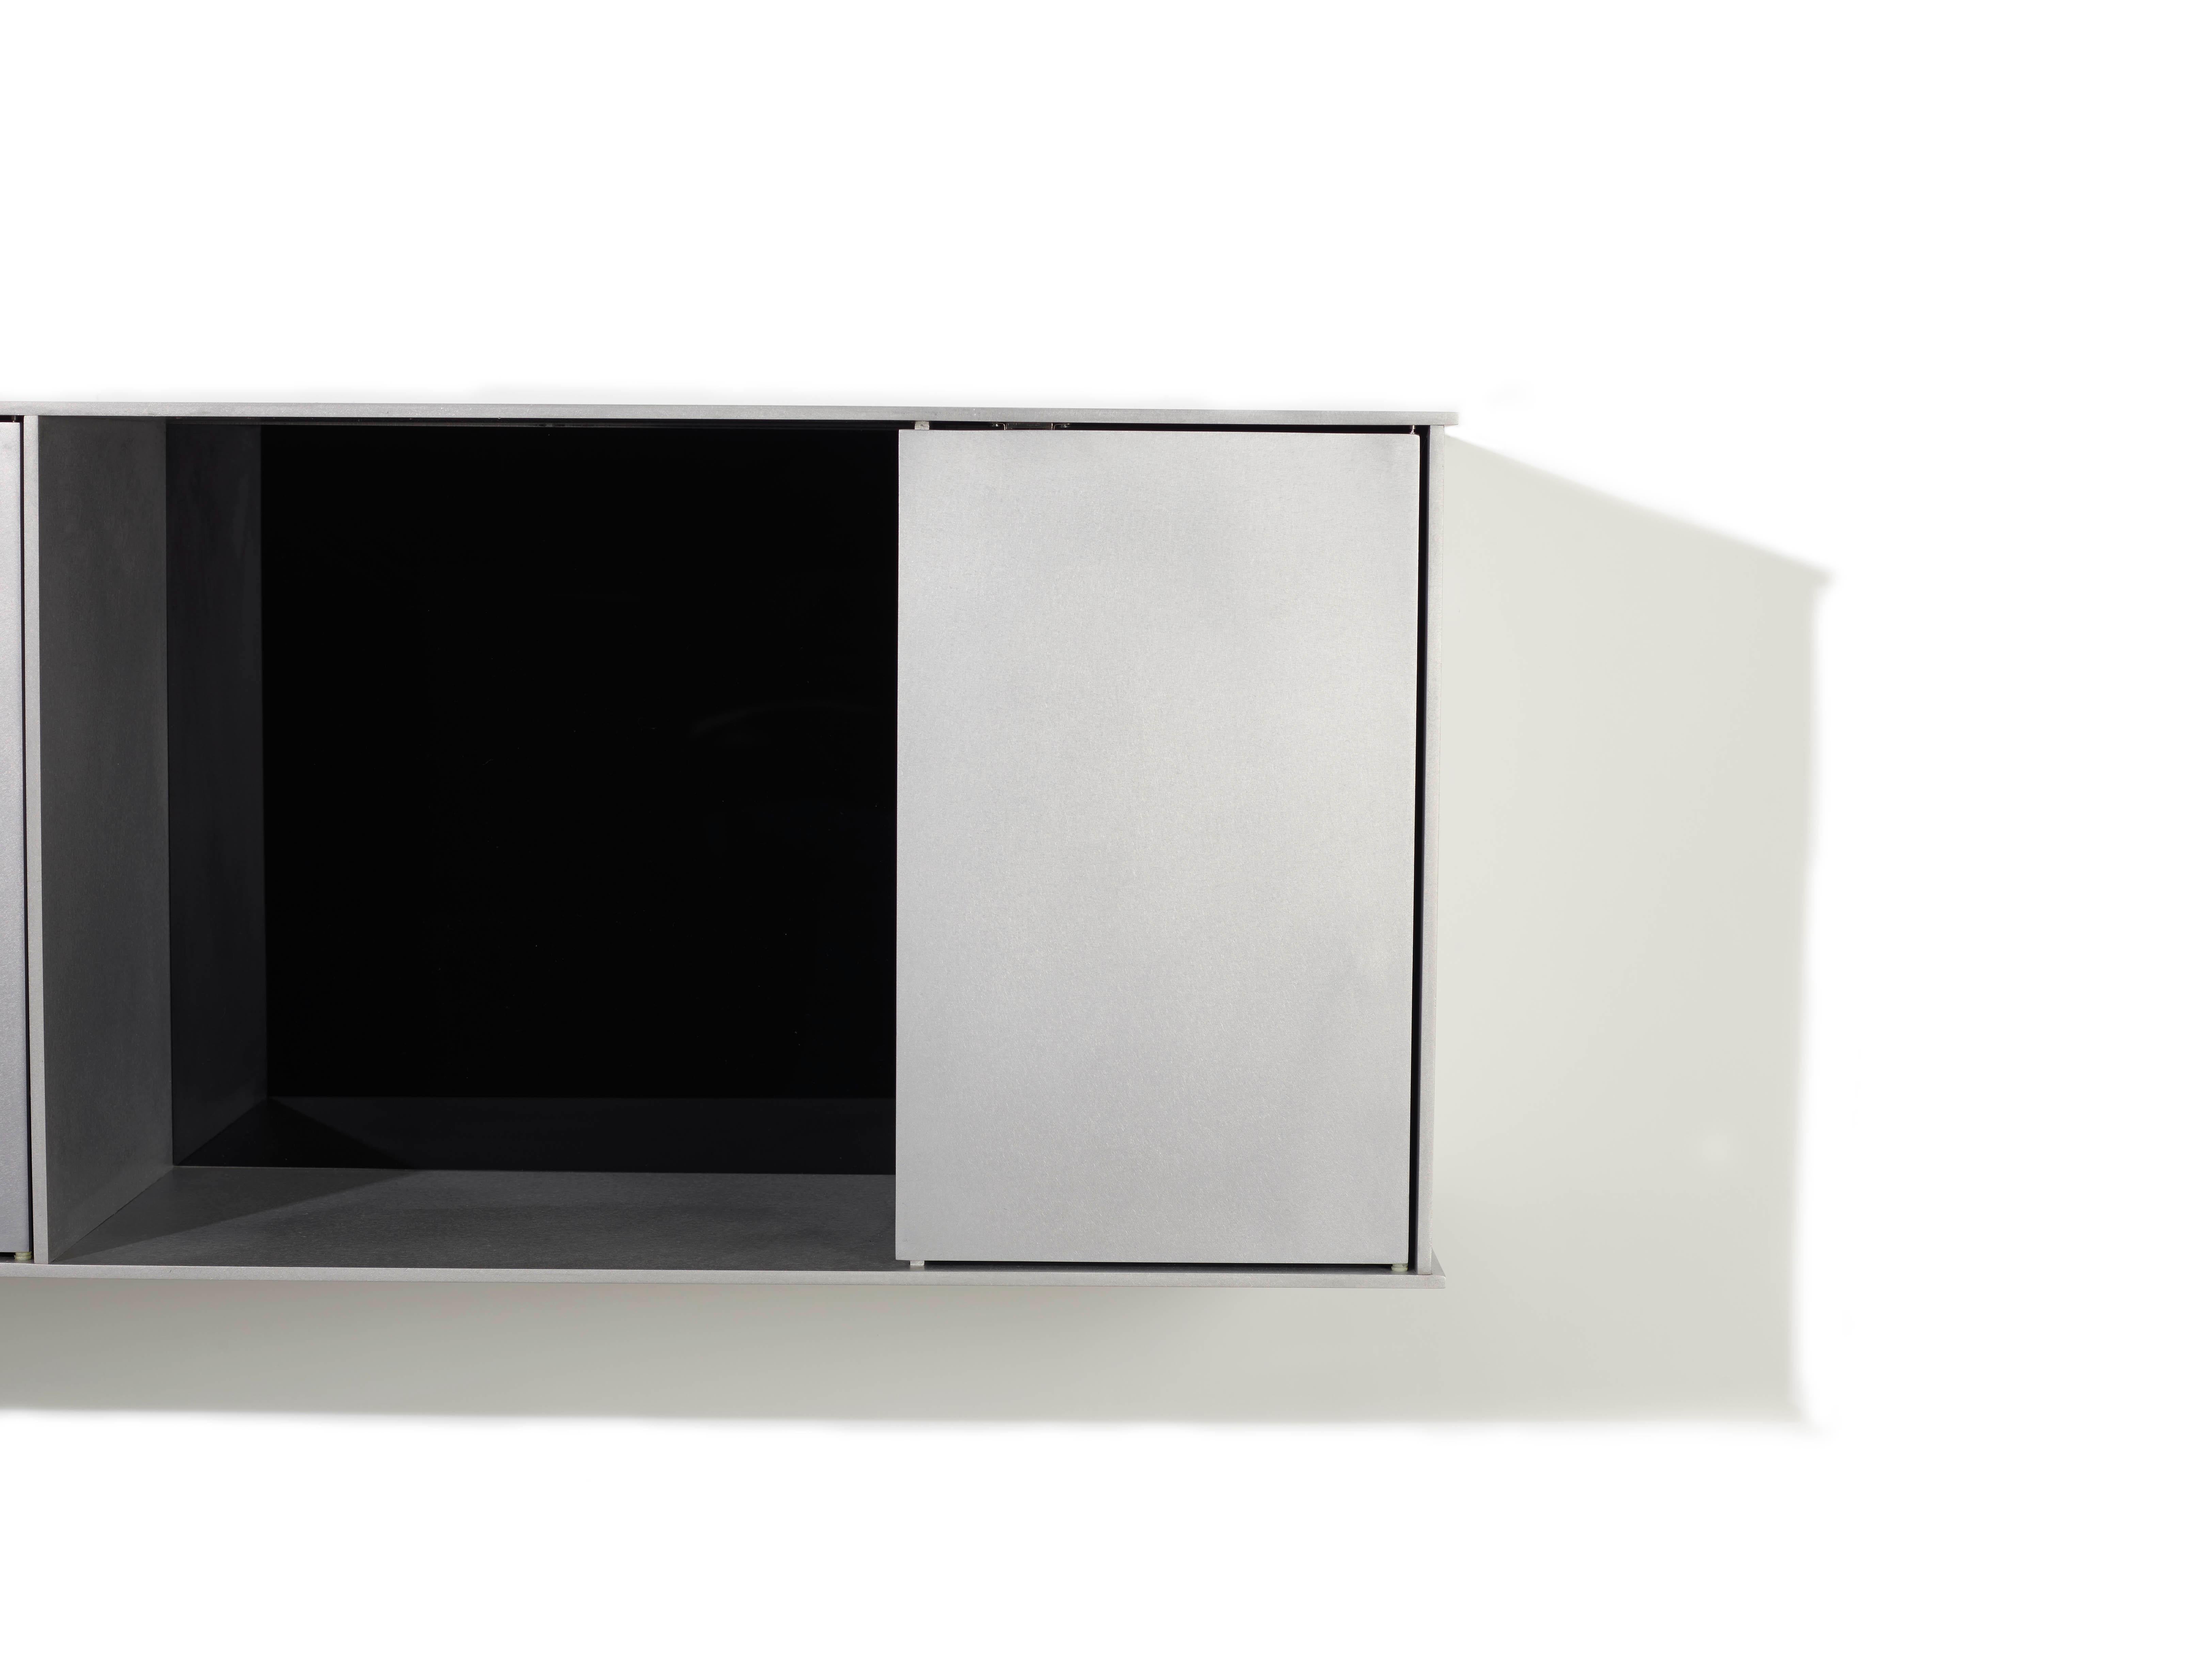 The Minimalist wall-mounted G shelf is sculpted out of 1/4 inch thick, wax-polished aluminum with two Minimalist pin-hinged doors. Each shelf has an inset welded U-channel that spans the length of the shelf and easily mounts on included custom-bent